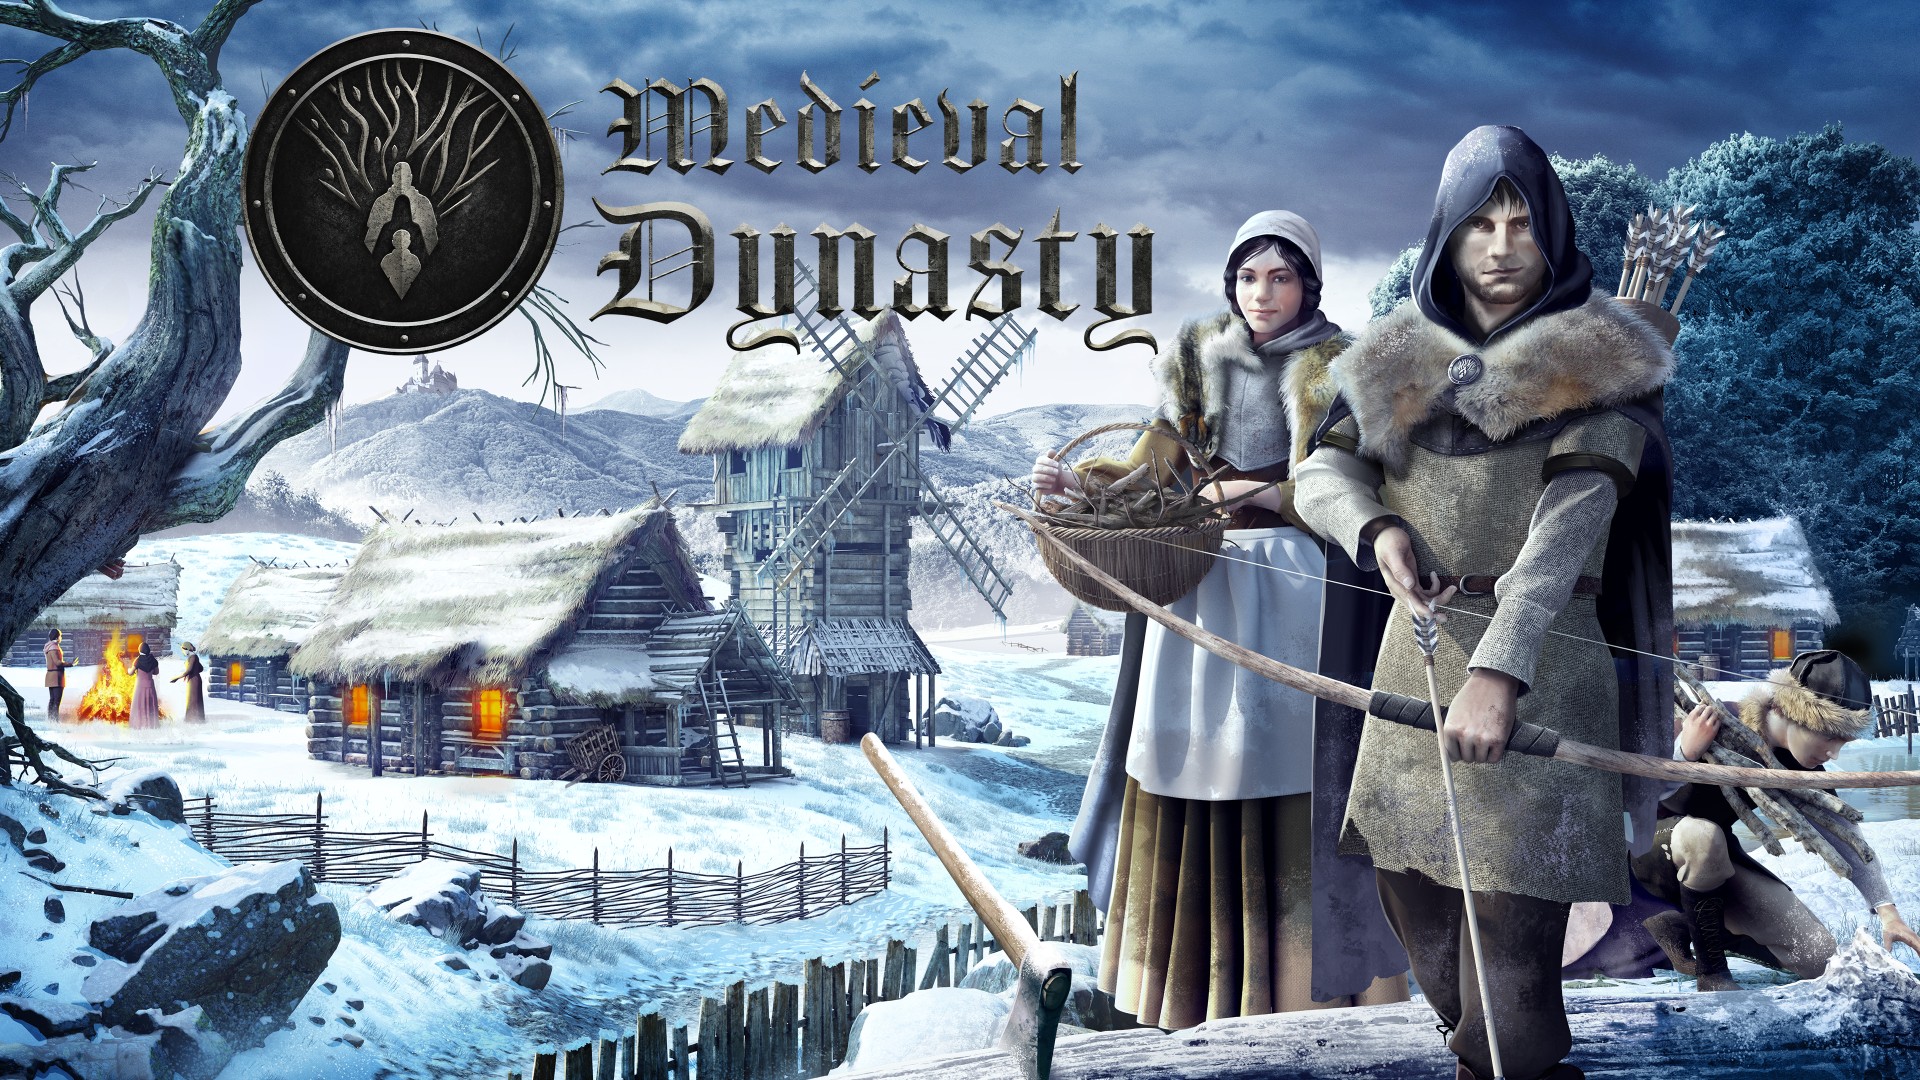 Medieval Dynasty (PC) ID@Xbox – Available now